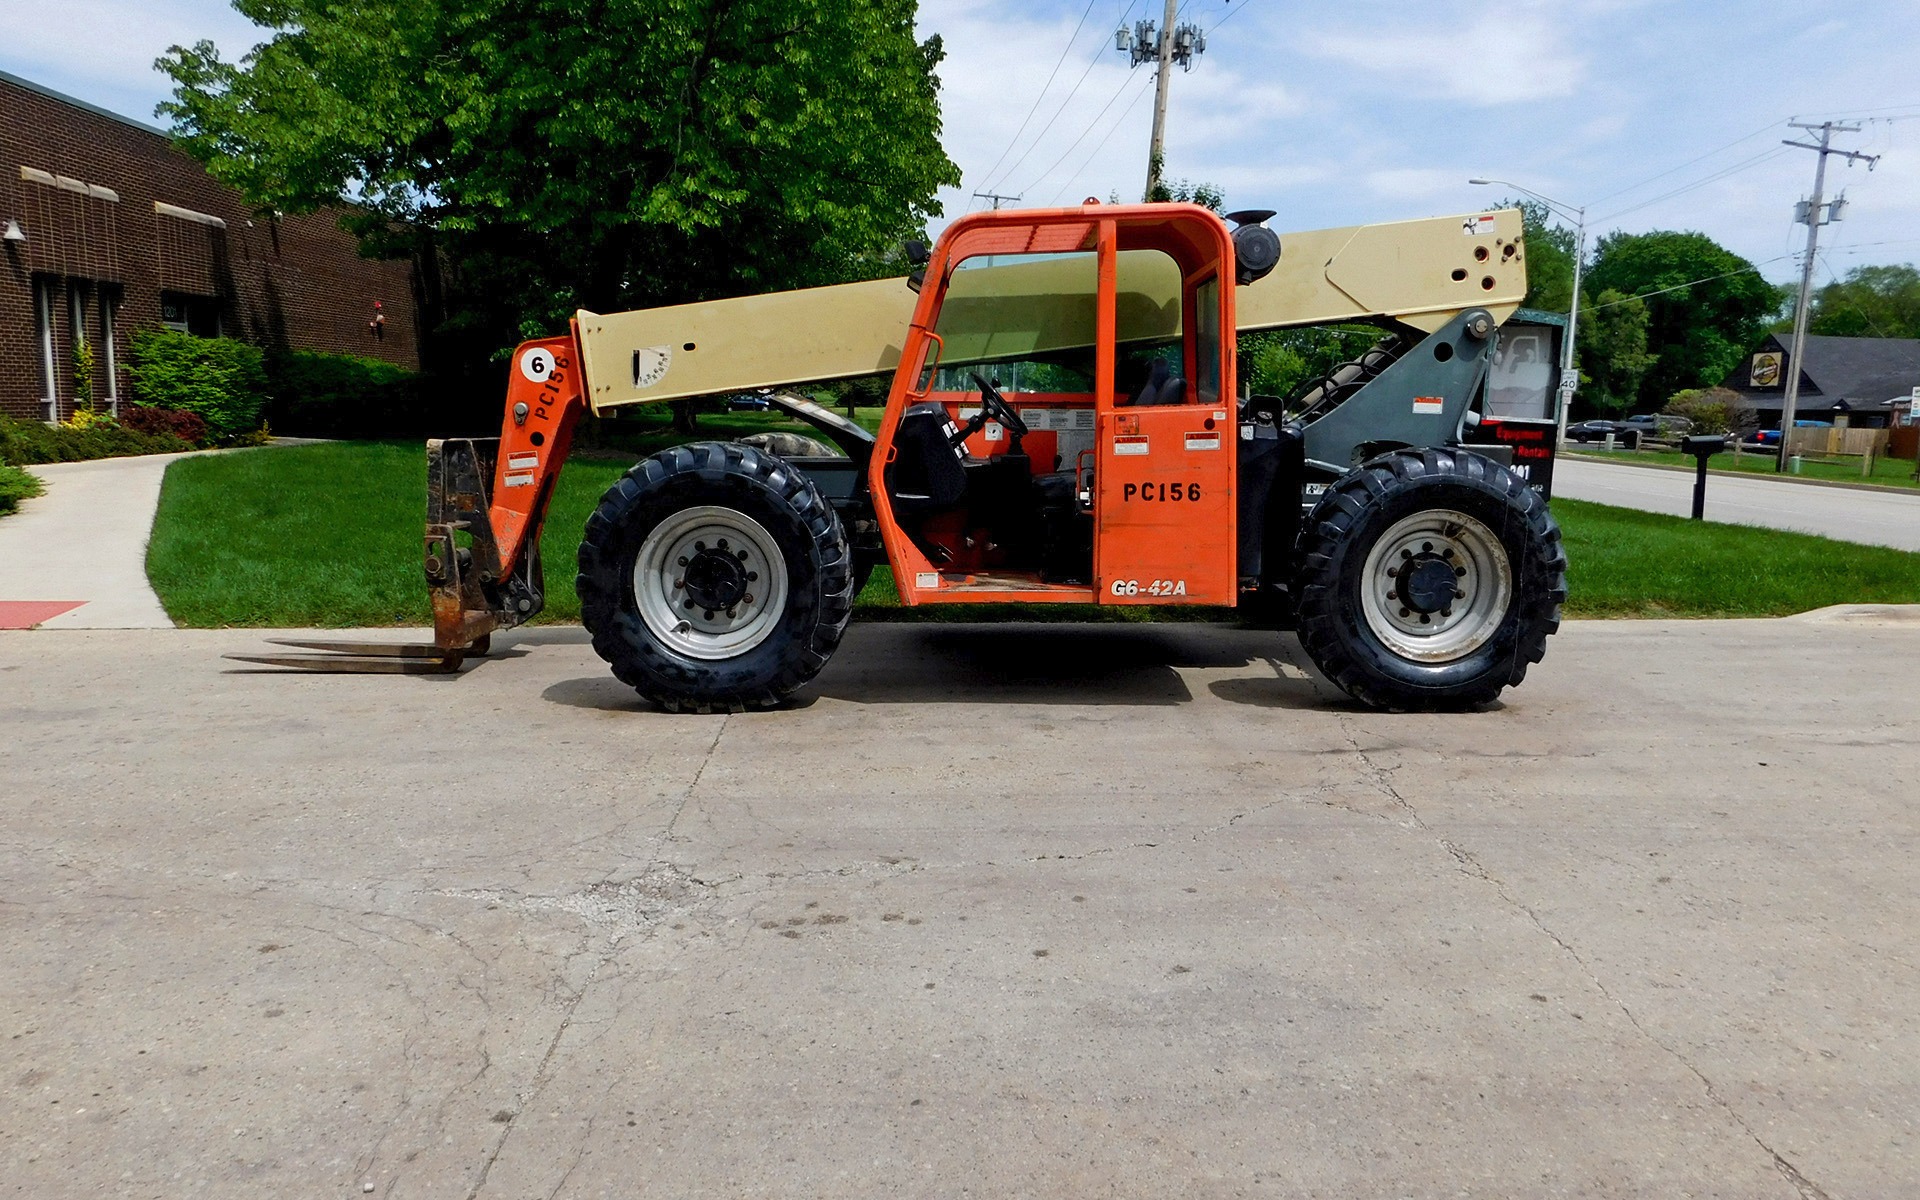 2006 Jlg G6 42a Telehandler On Sale In Chicago Chicago Lift Equipment Forklifts For Sale In Chicago